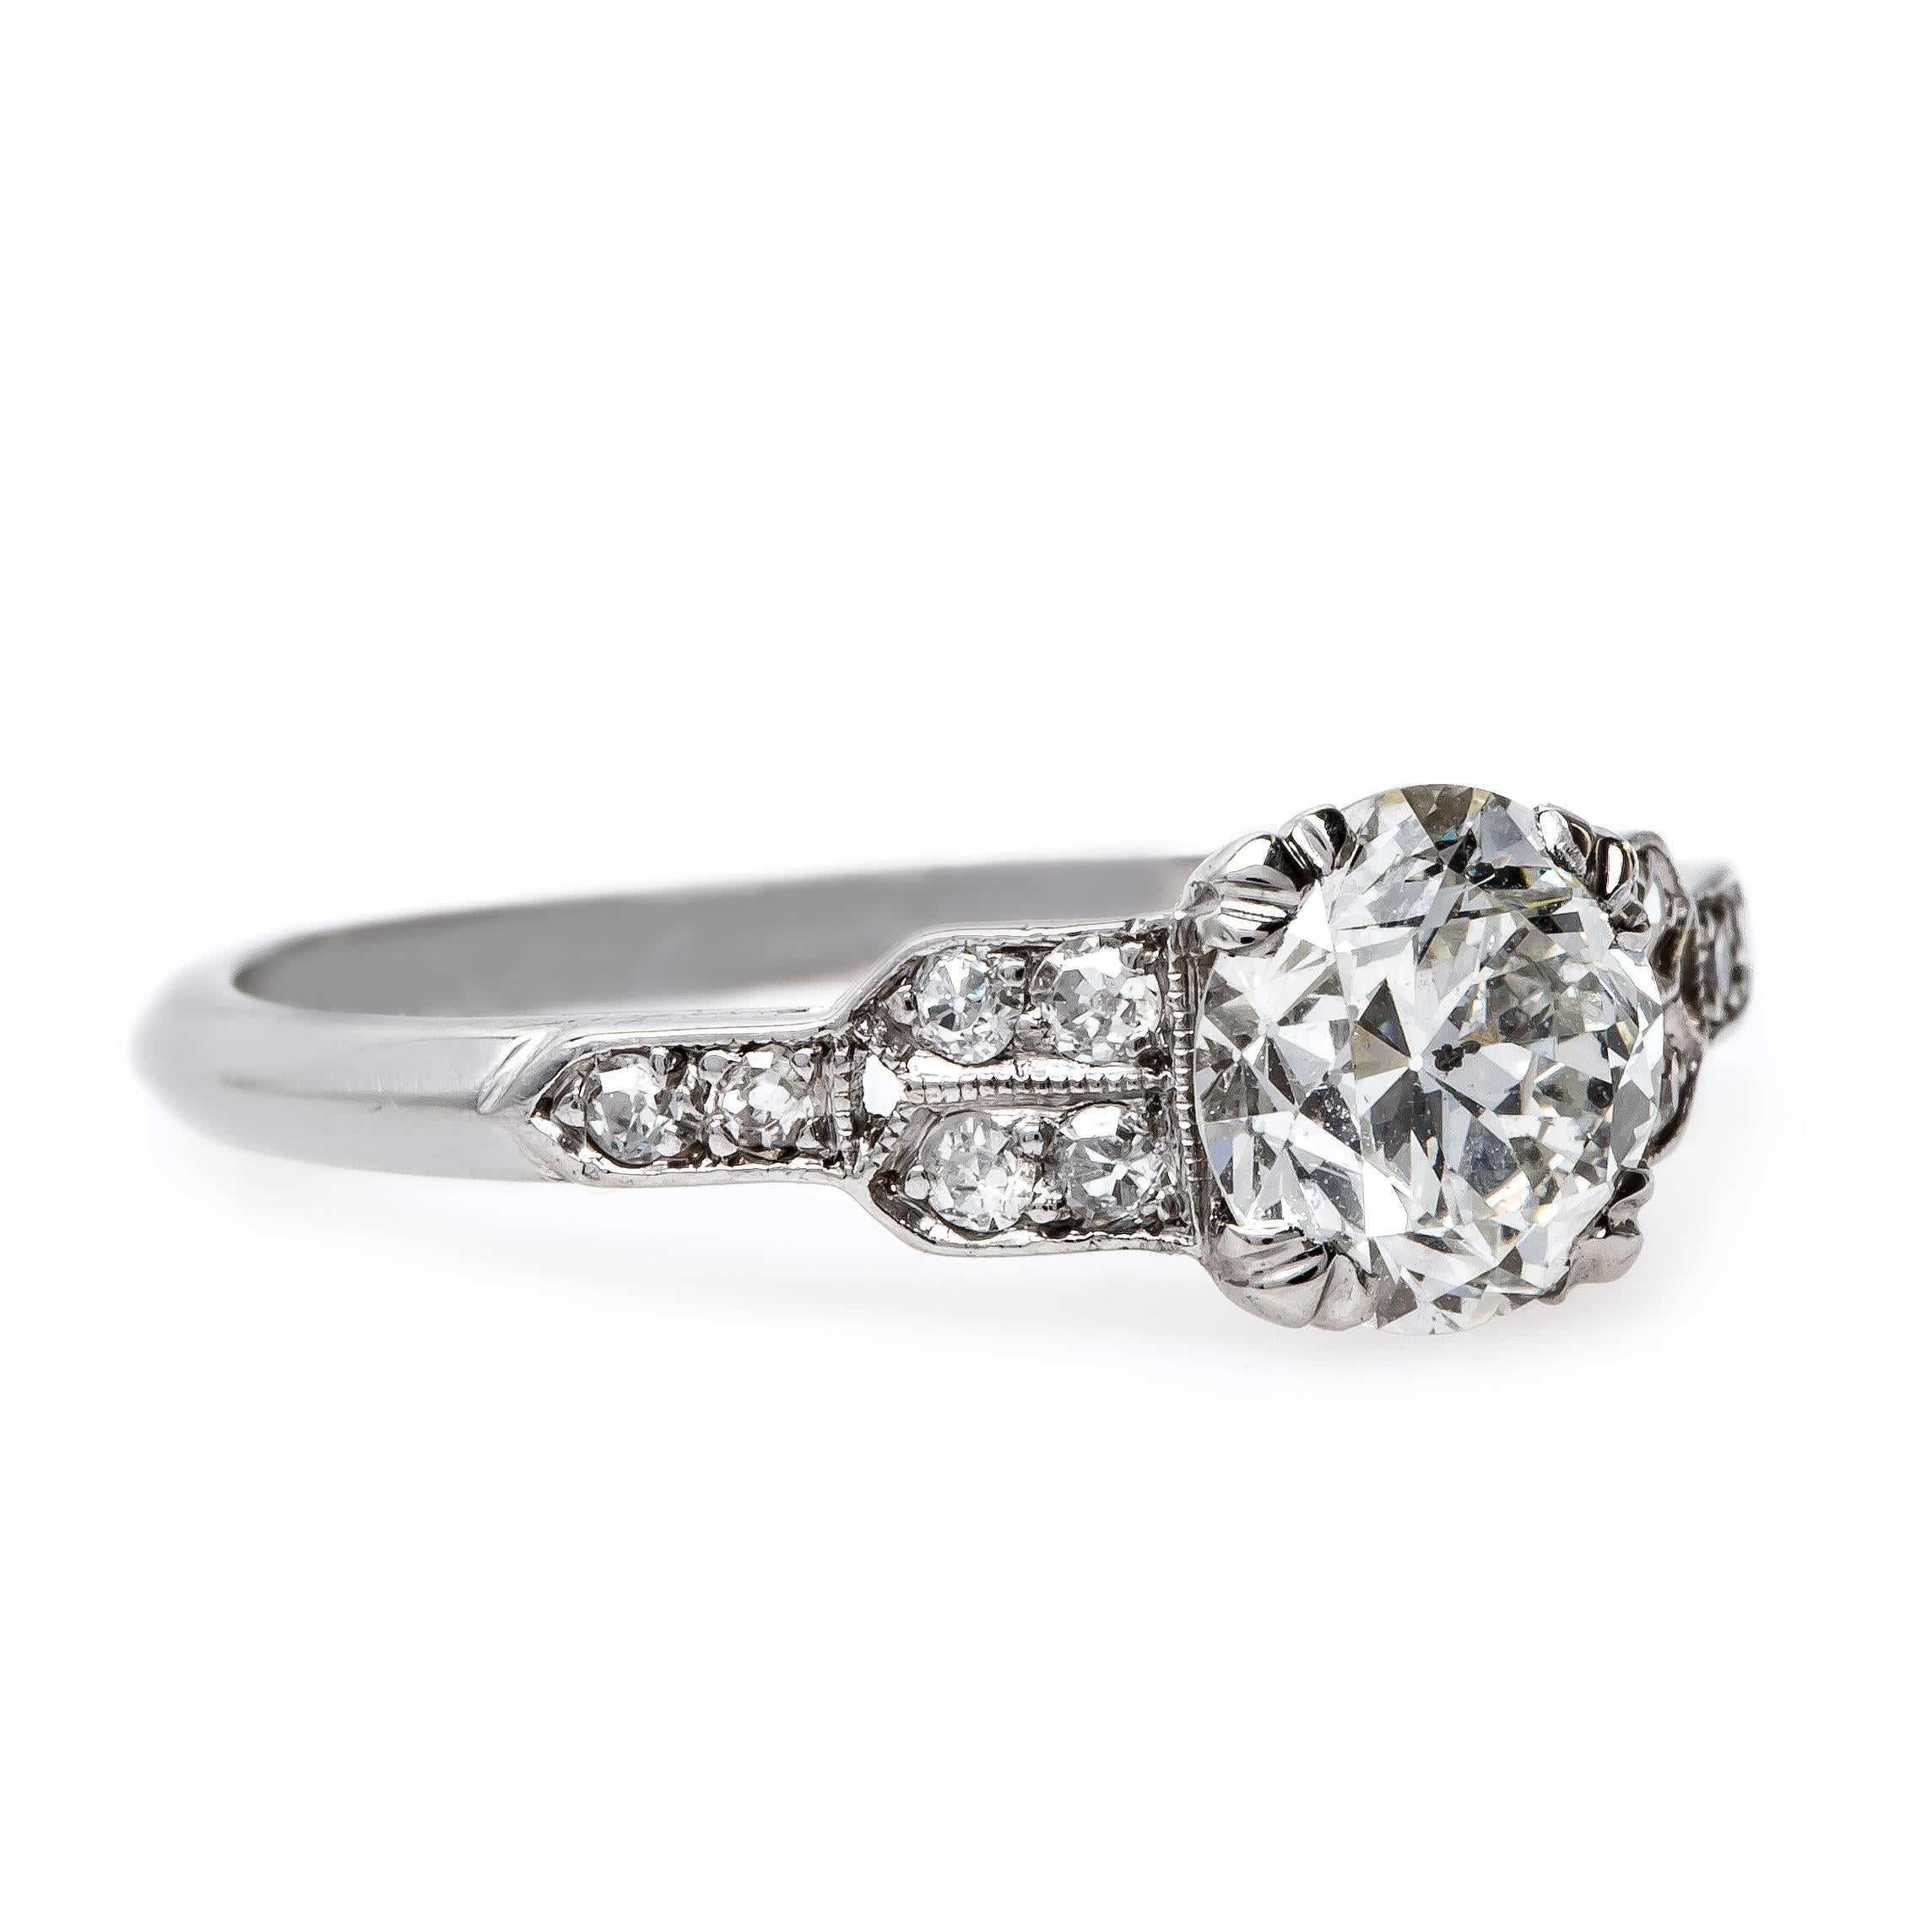 Queen Street is a truly one-of-a-kind Art Deco (circa 1930) platinum engagement ring with an elaborate prong-set 1.20ct EGL certified Old European Cut diamond graded G color and SI2 clarity. This sparking center diamond set low to the finger framed